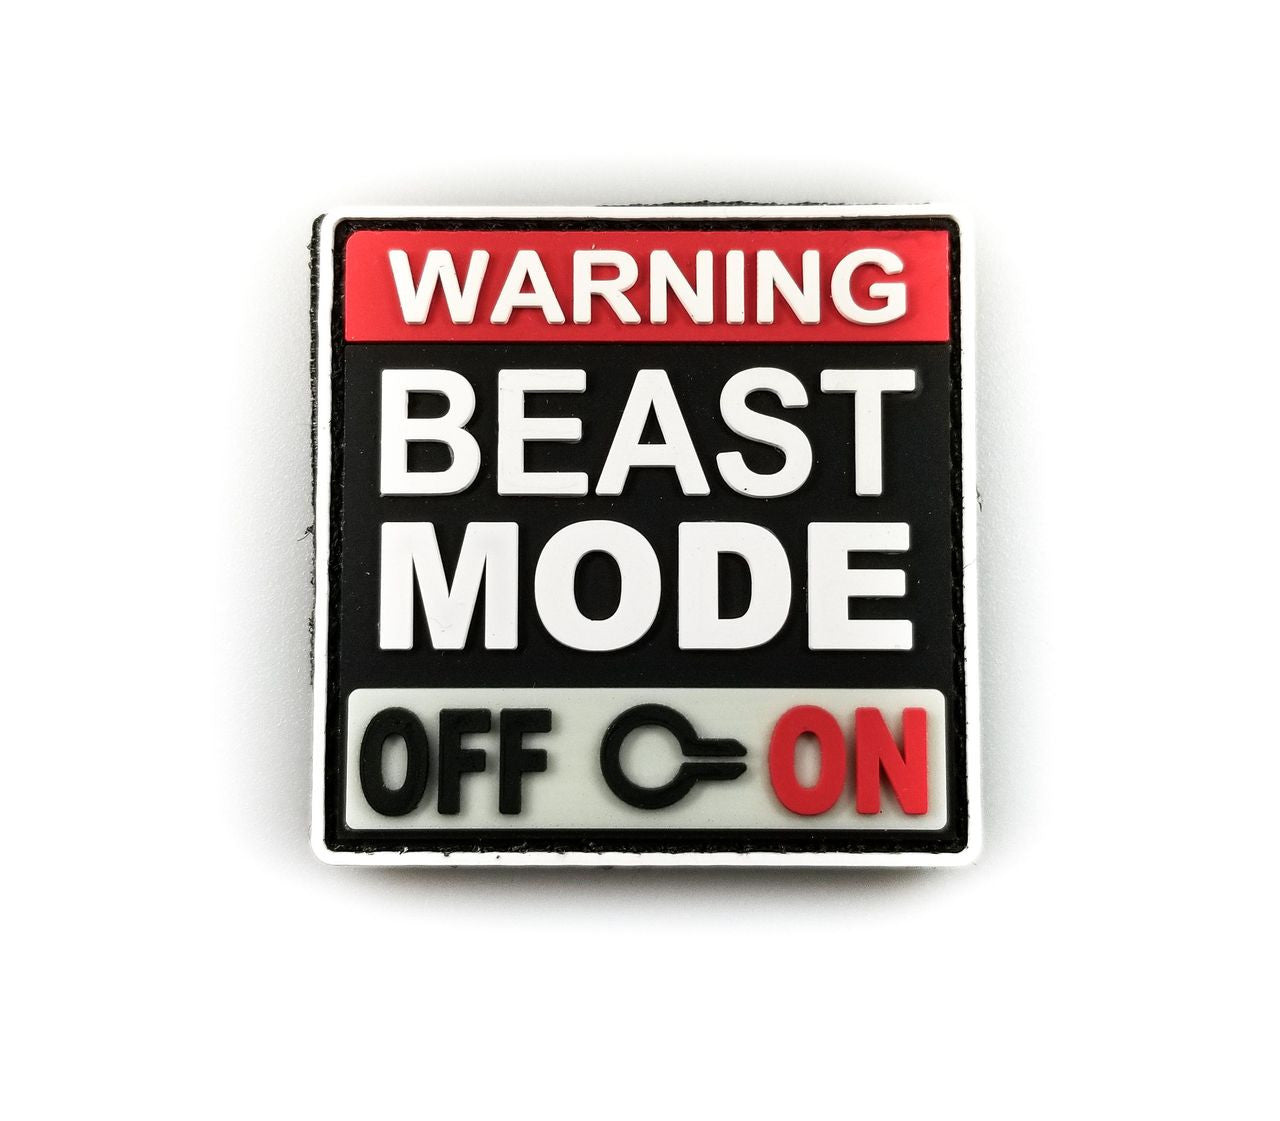 TIC Patch - WARNING BEAST MODE